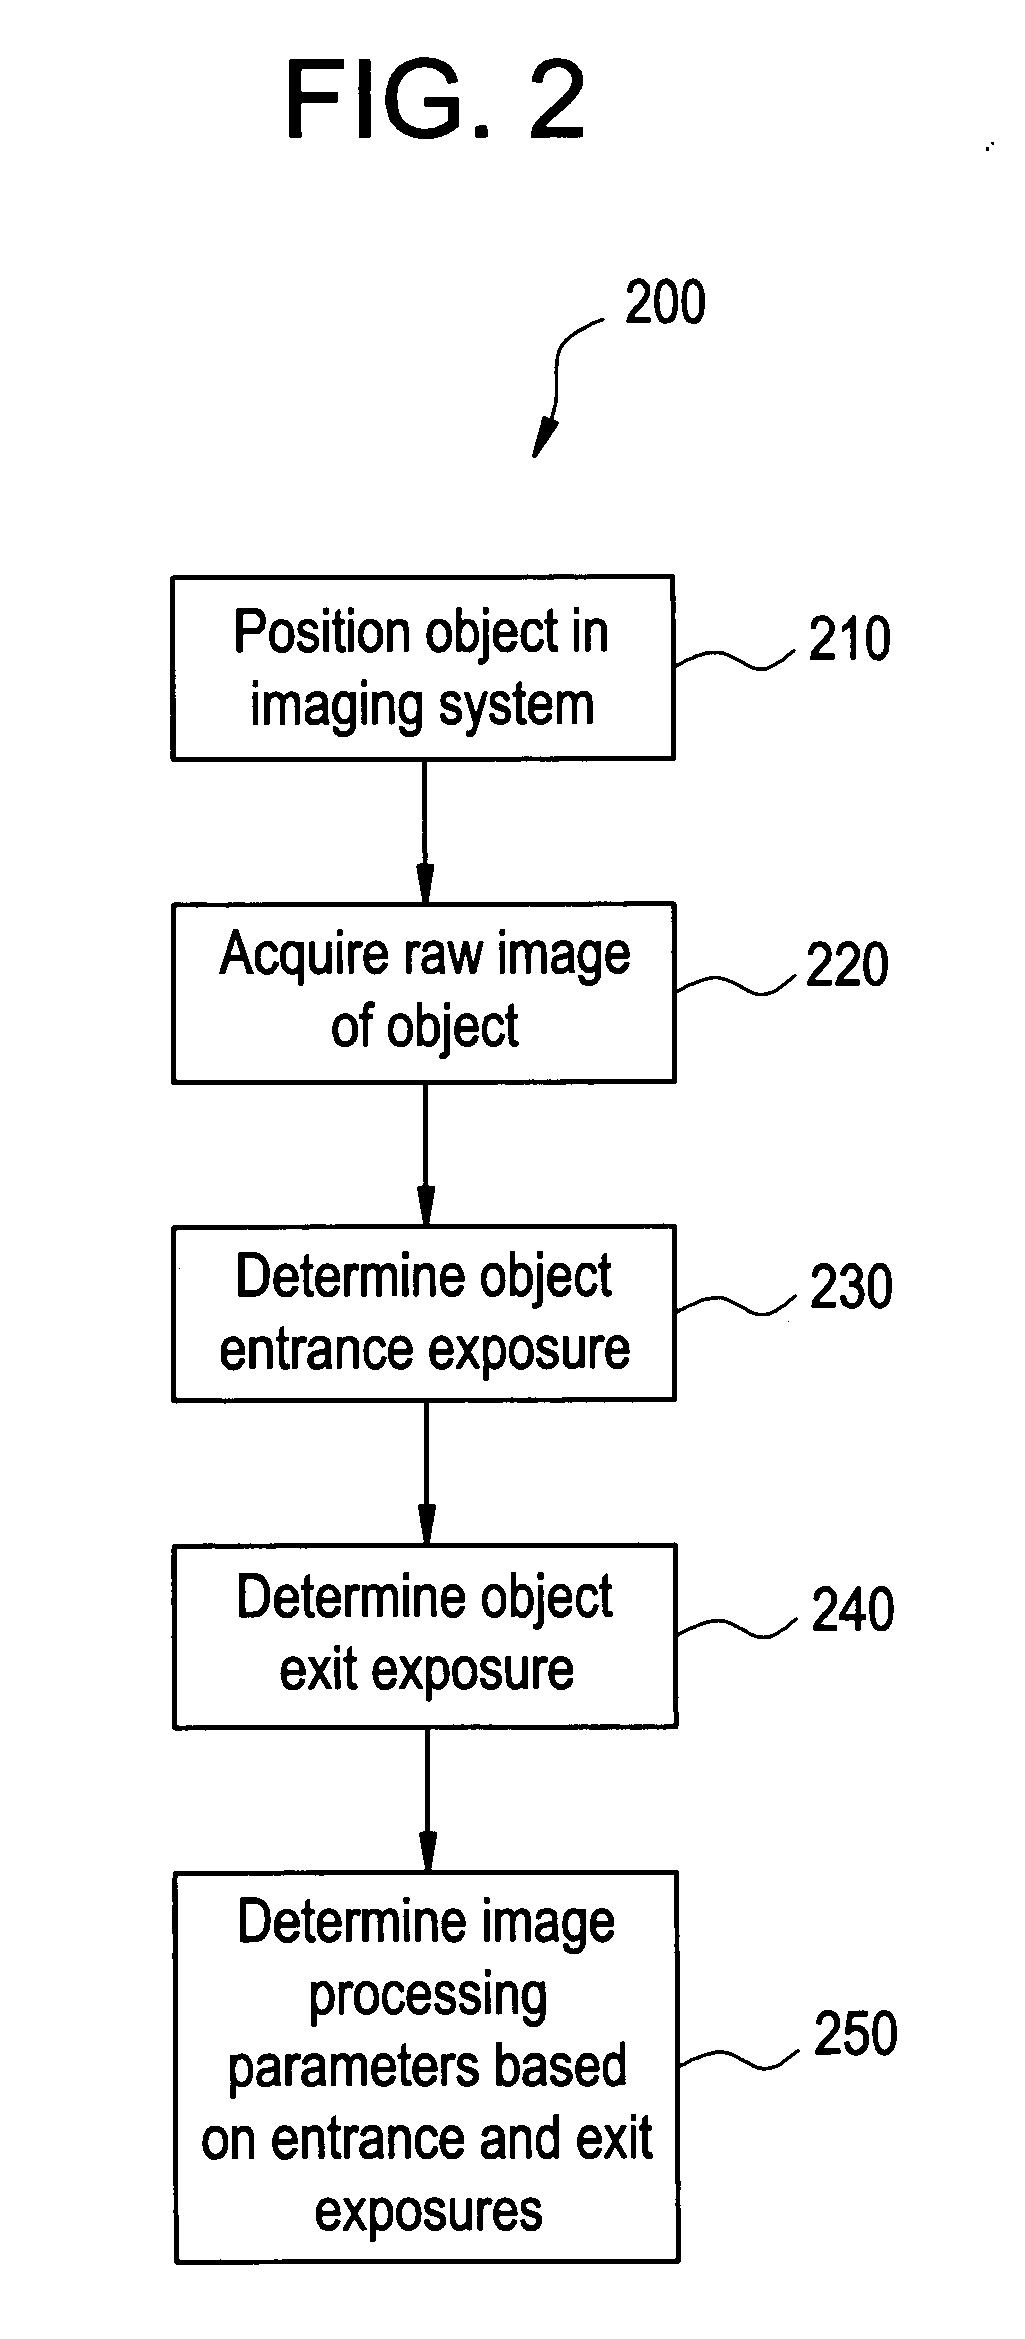 Adaptive image processing and display for digital and computed radiography images